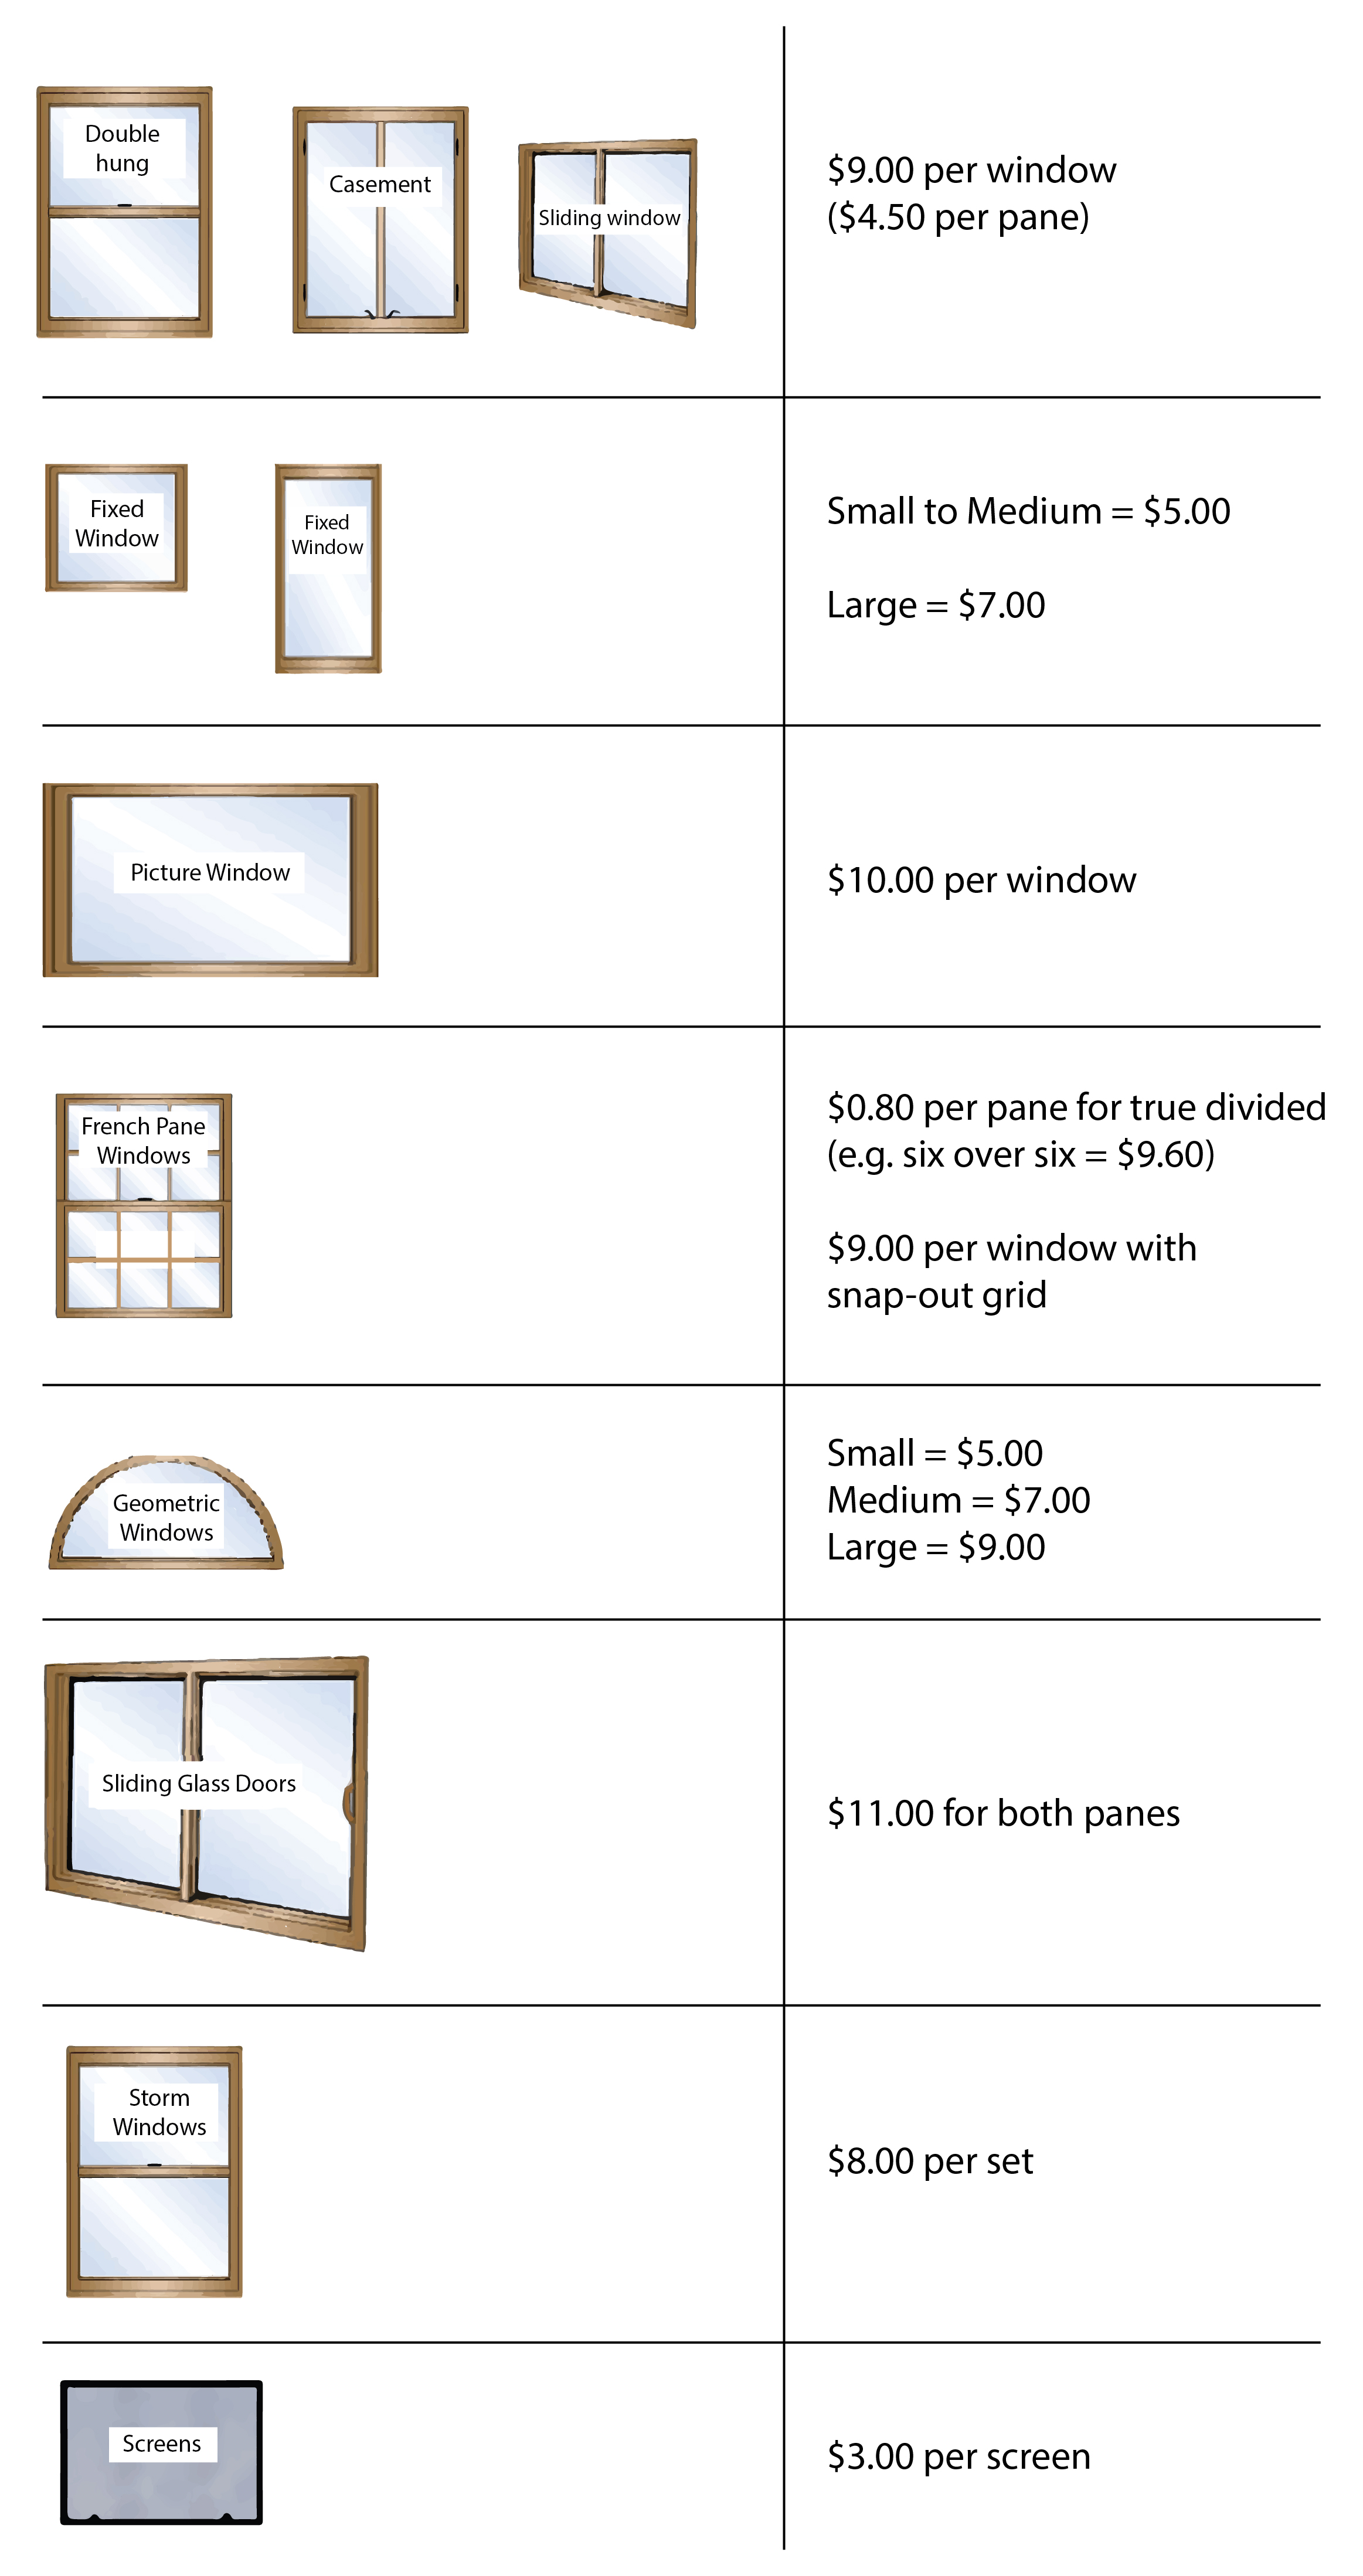 Pricing Guide: How to Price Window Cleaning Jobs - Joist